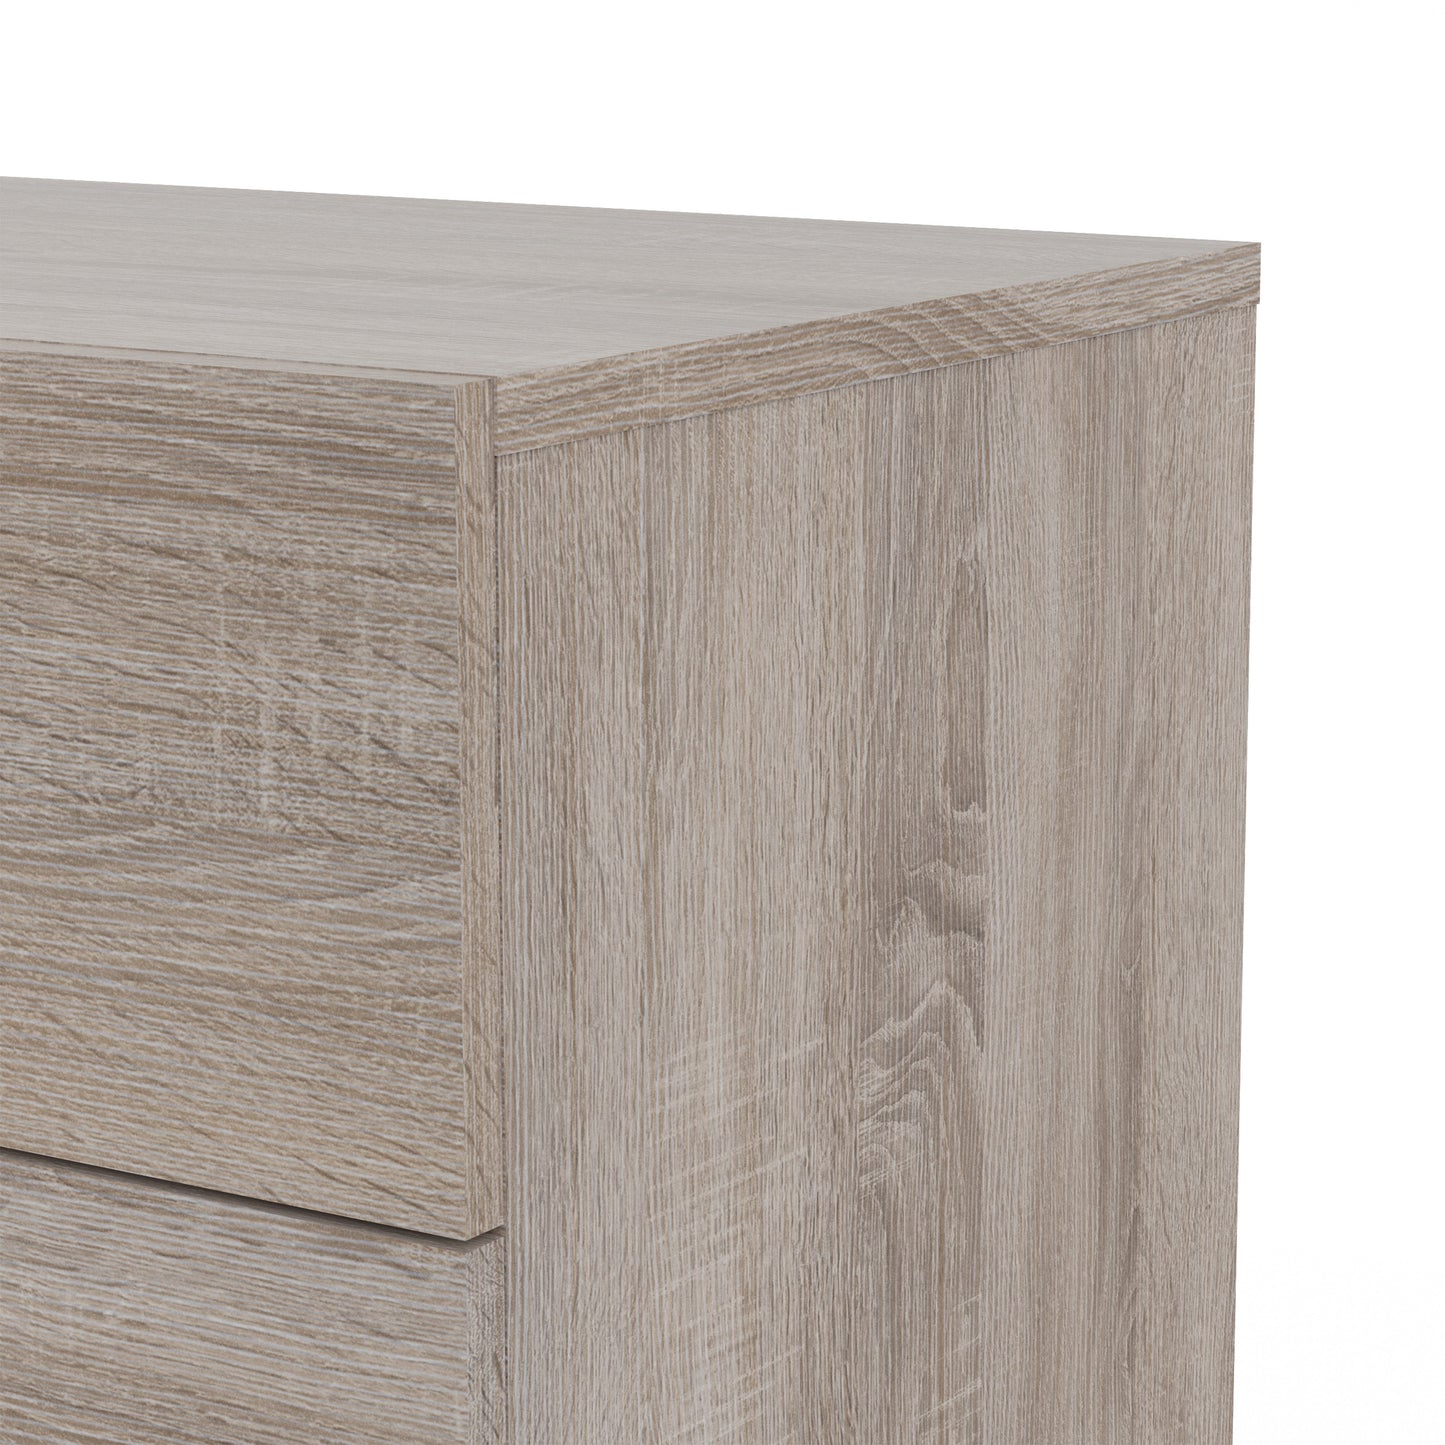 Pepe  Wide Chest of 8 Drawers (4+4) in Truffle Oak